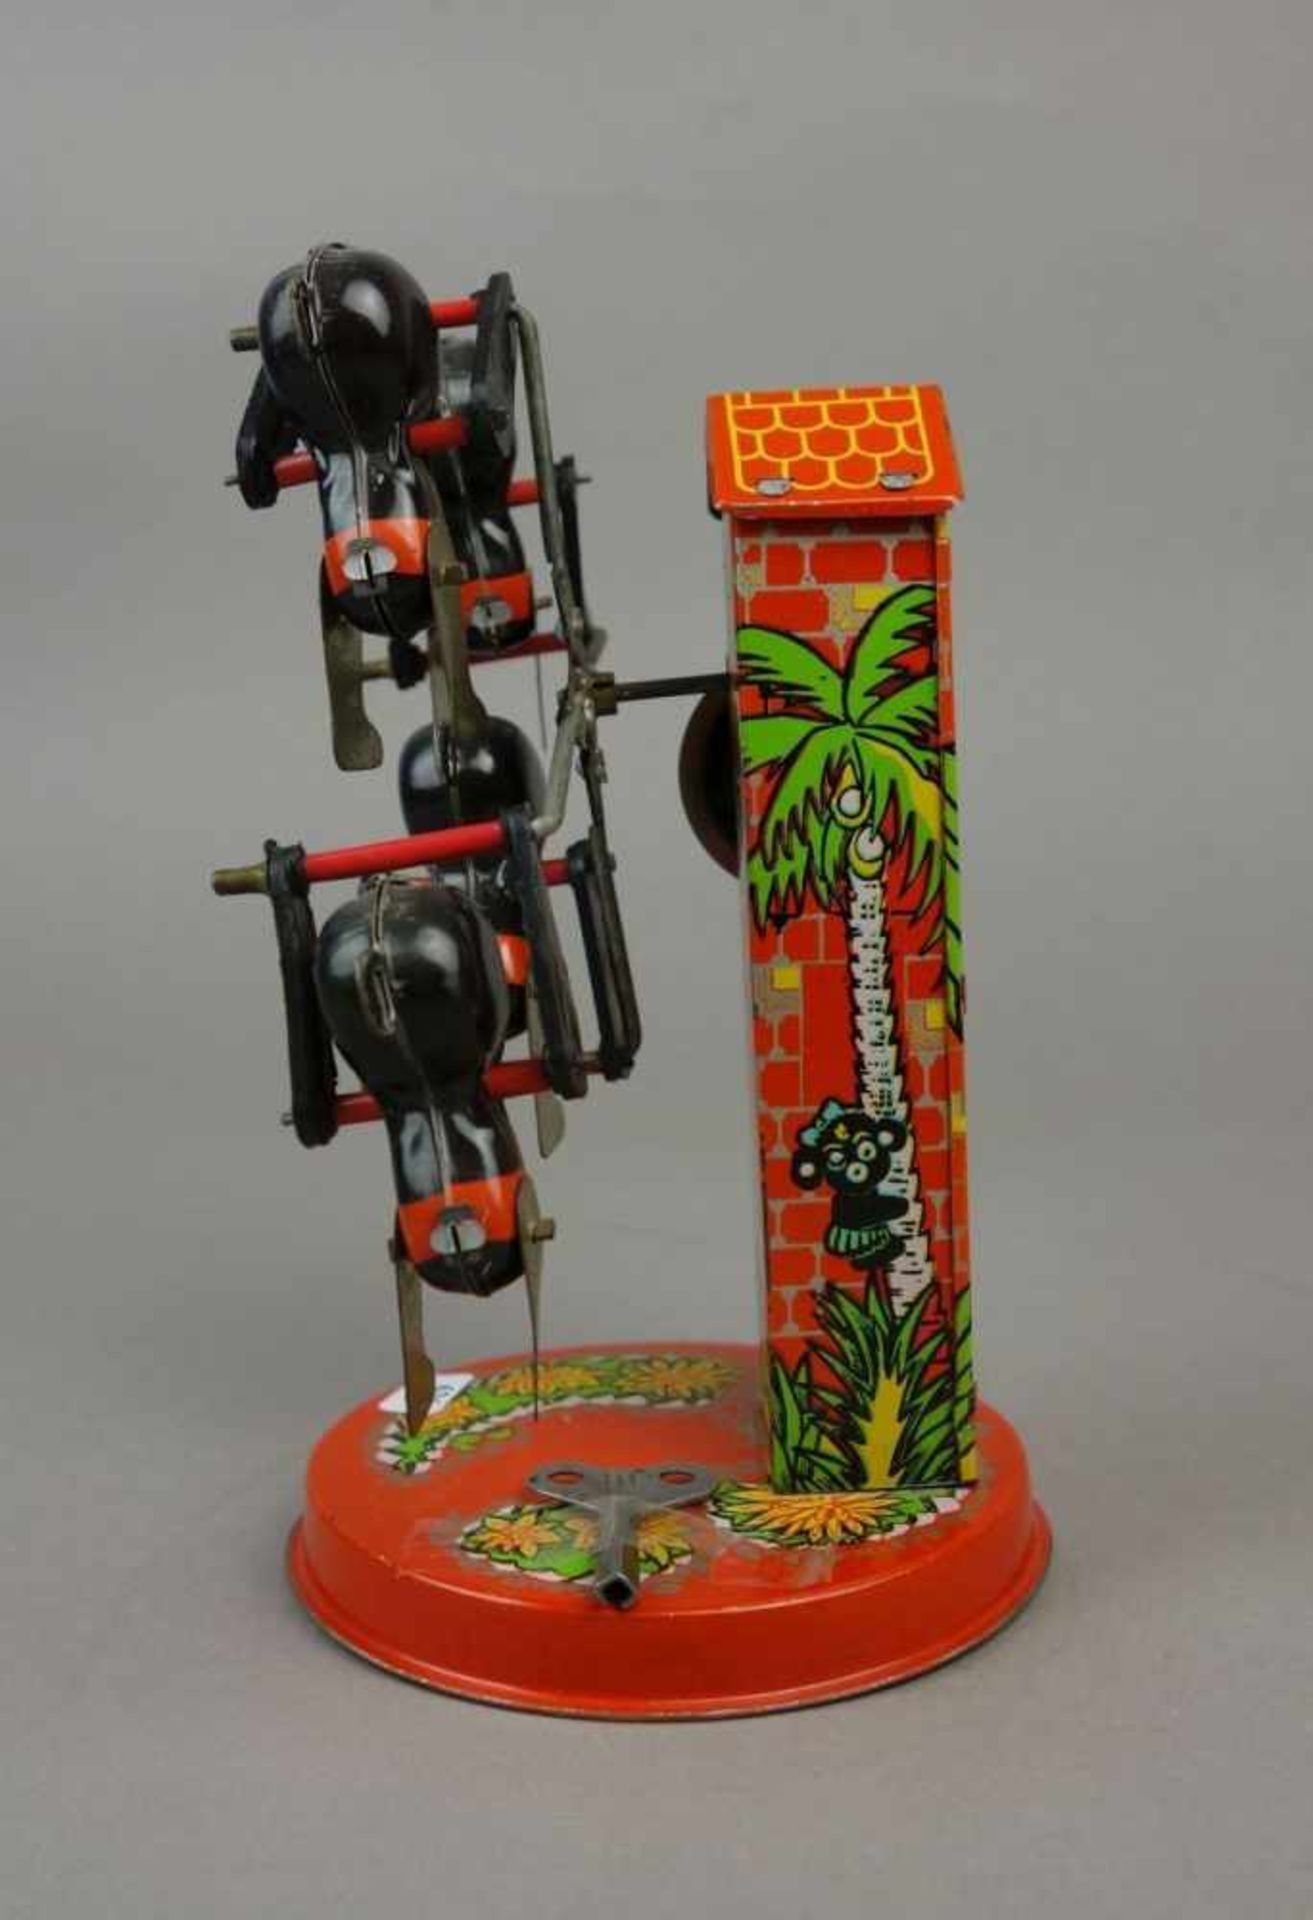 BLECHSPIELZEUG: Karussell / "Affenschaukel" / tin toy carousel with apes, Blech, polychrom - Image 4 of 7